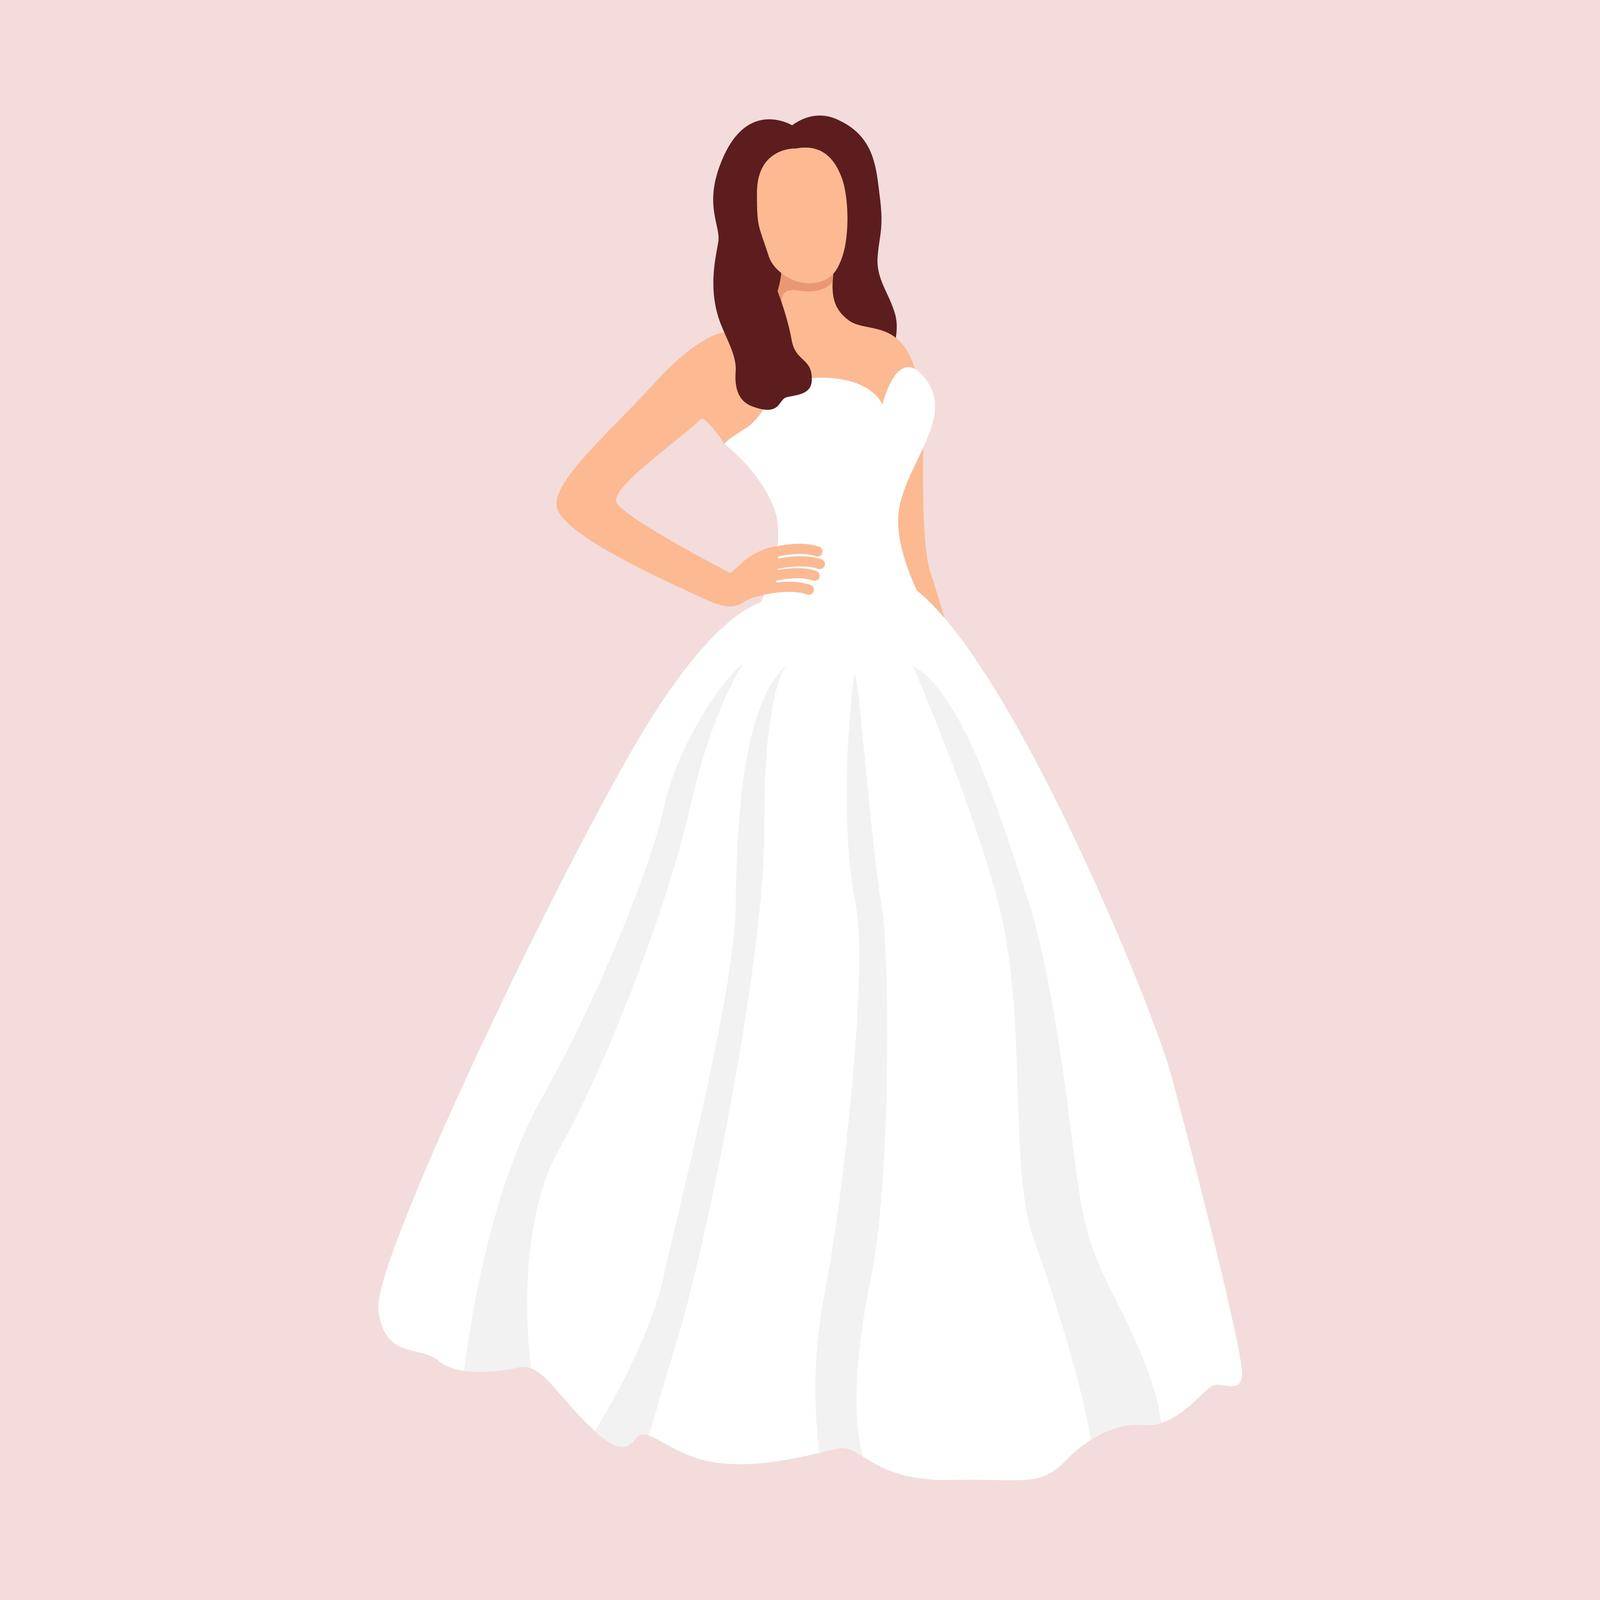 Bride in white wedding dress vector illustration. Abstract young woman in evening long dress. Beautiful female faceless image. Wedding image of girl